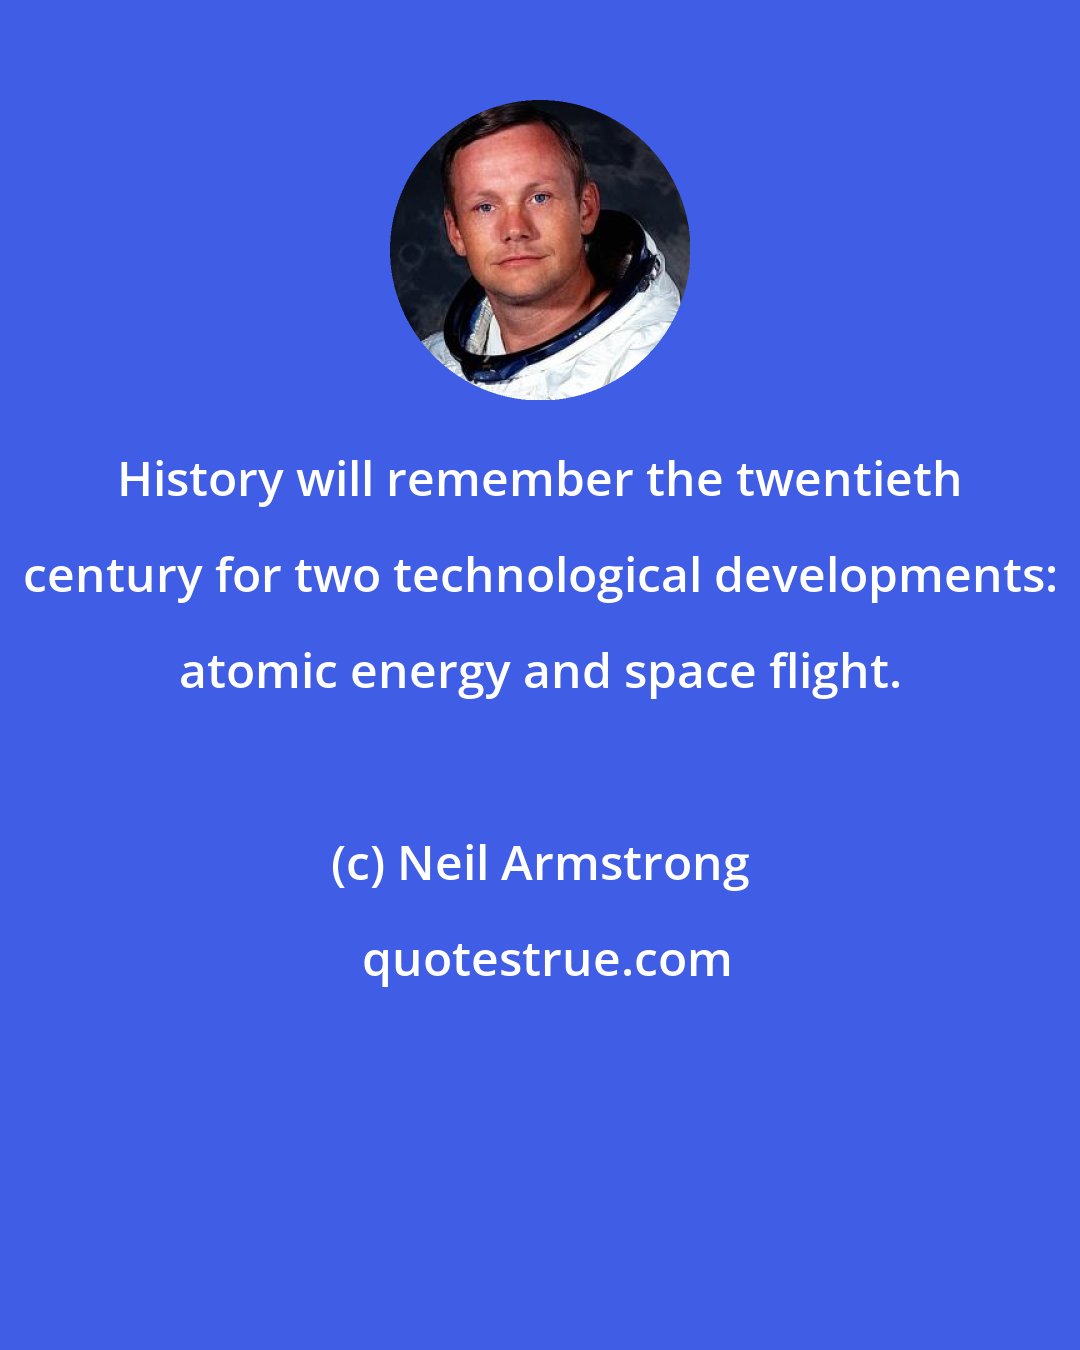 Neil Armstrong: History will remember the twentieth century for two technological developments: atomic energy and space flight.